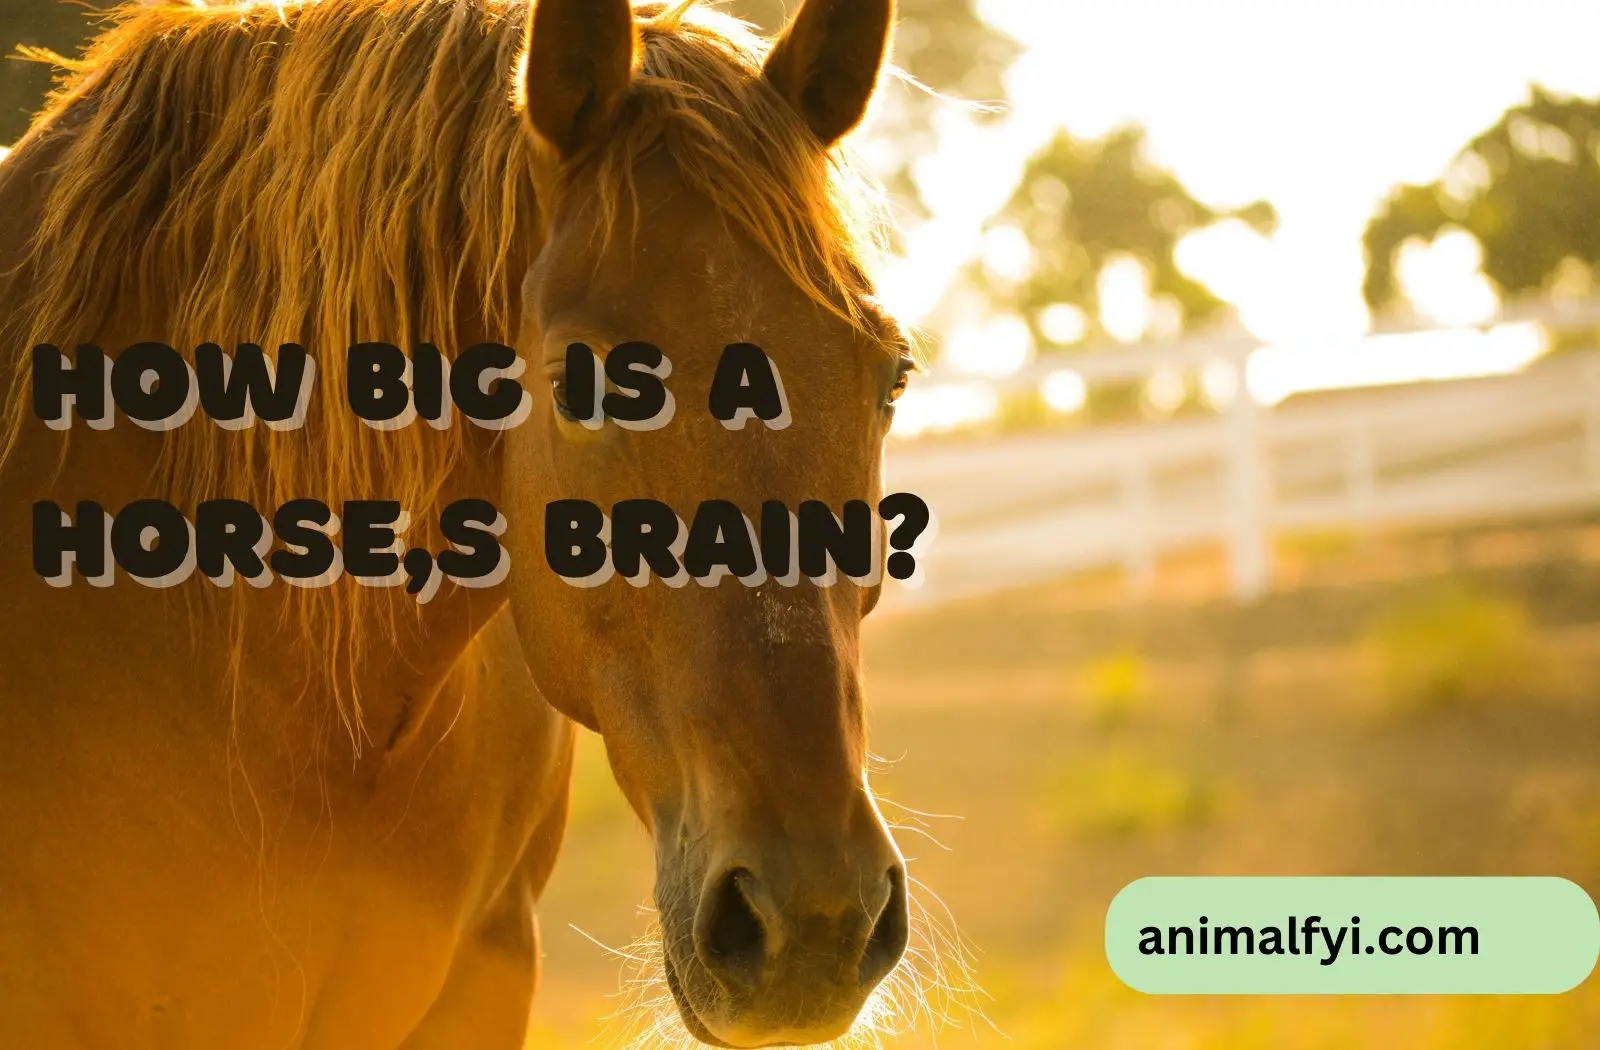 How Big is a Horse's Brain?